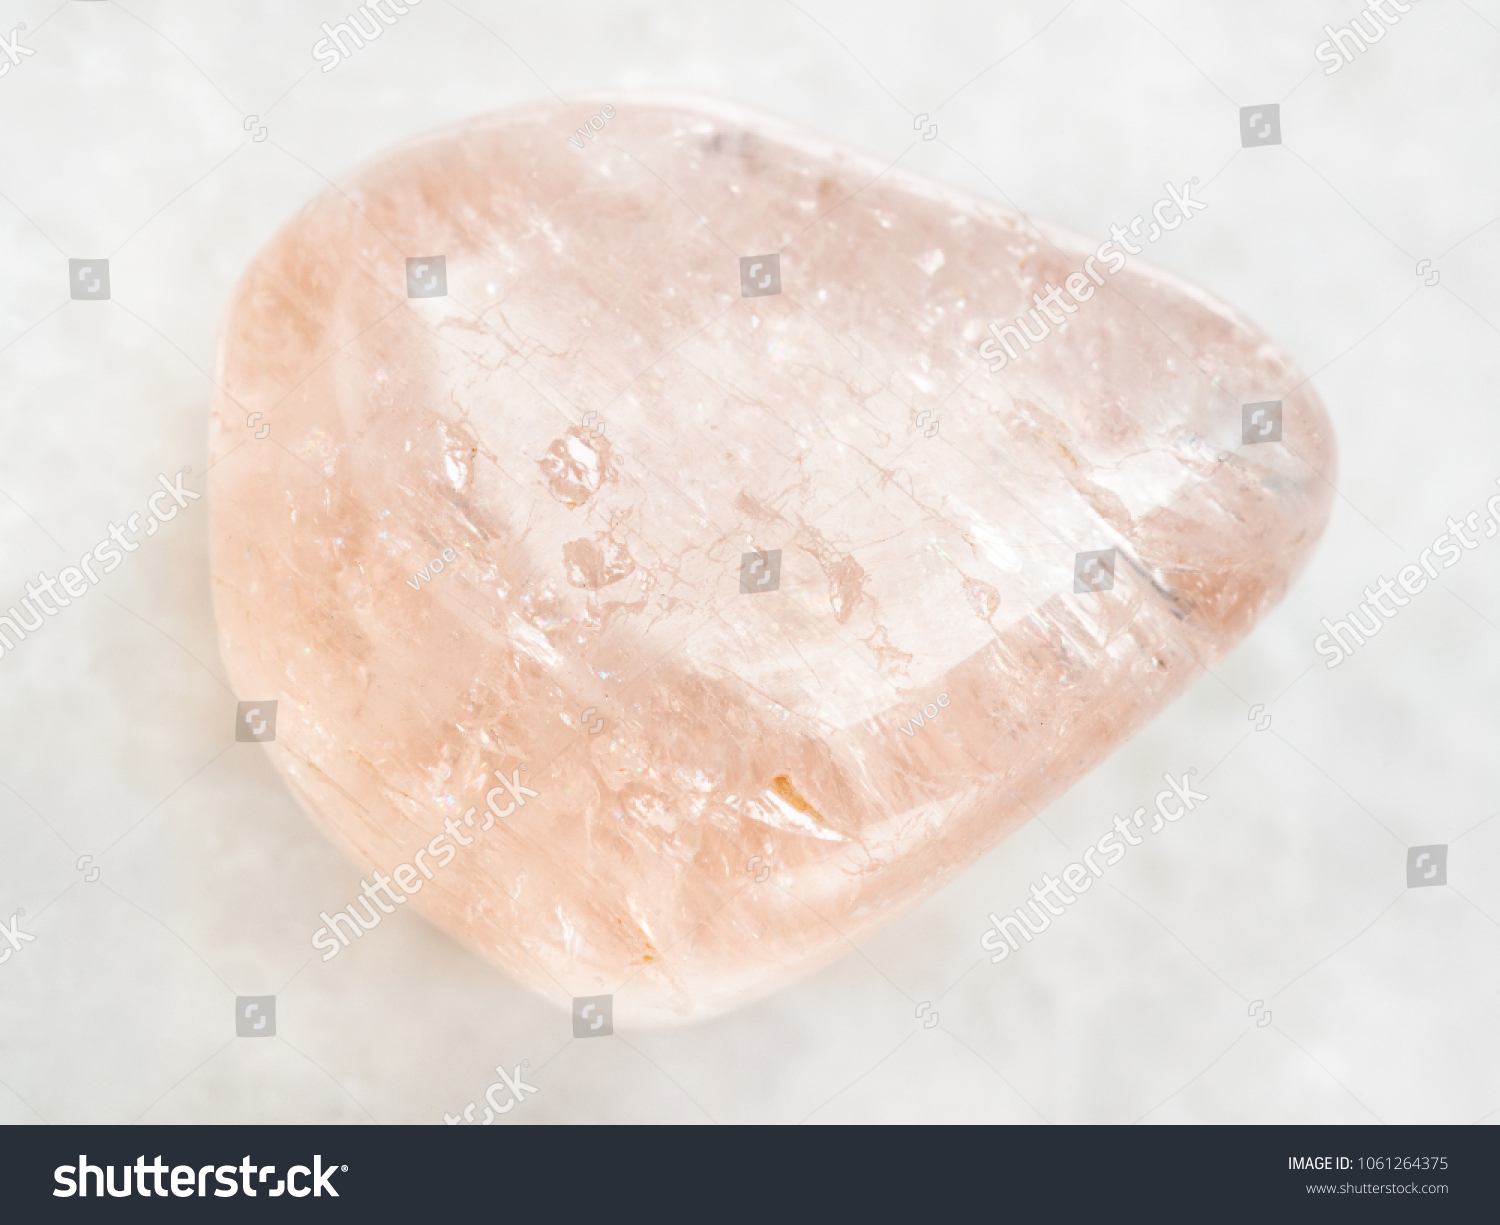 macro shooting of natural mineral rock specimen - morganite (pink beryl) gemstone on white marble background from Ural Mountains, Russia #1061264375